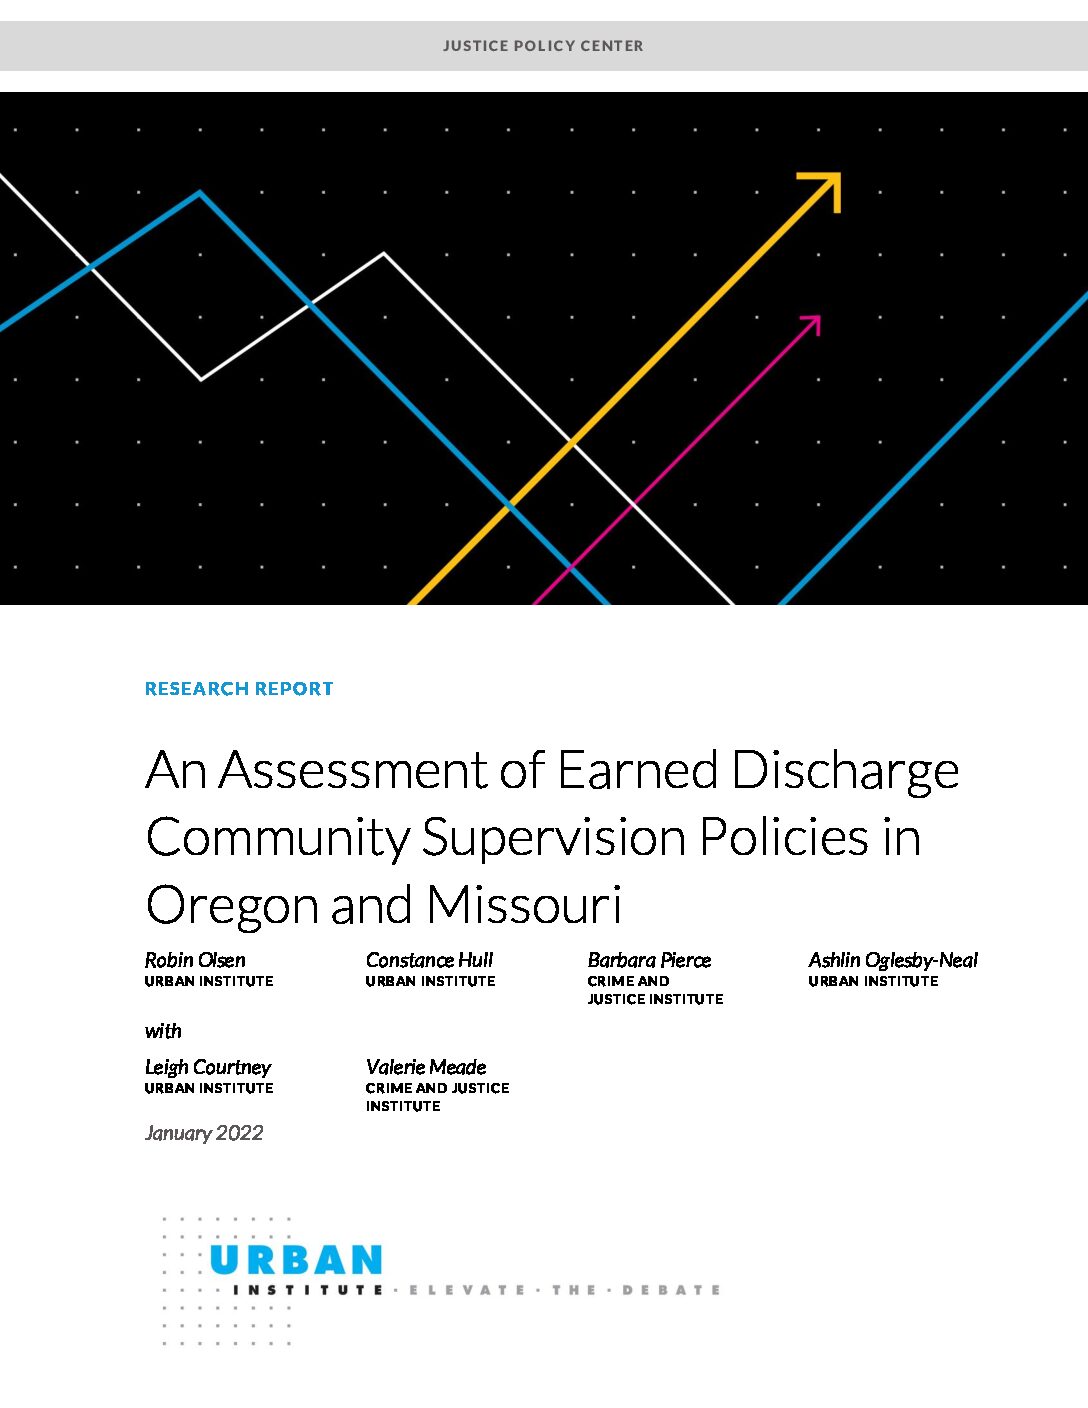 An Assessment of Earned Discharge Community Supervision Policies in Oregon and Missouri